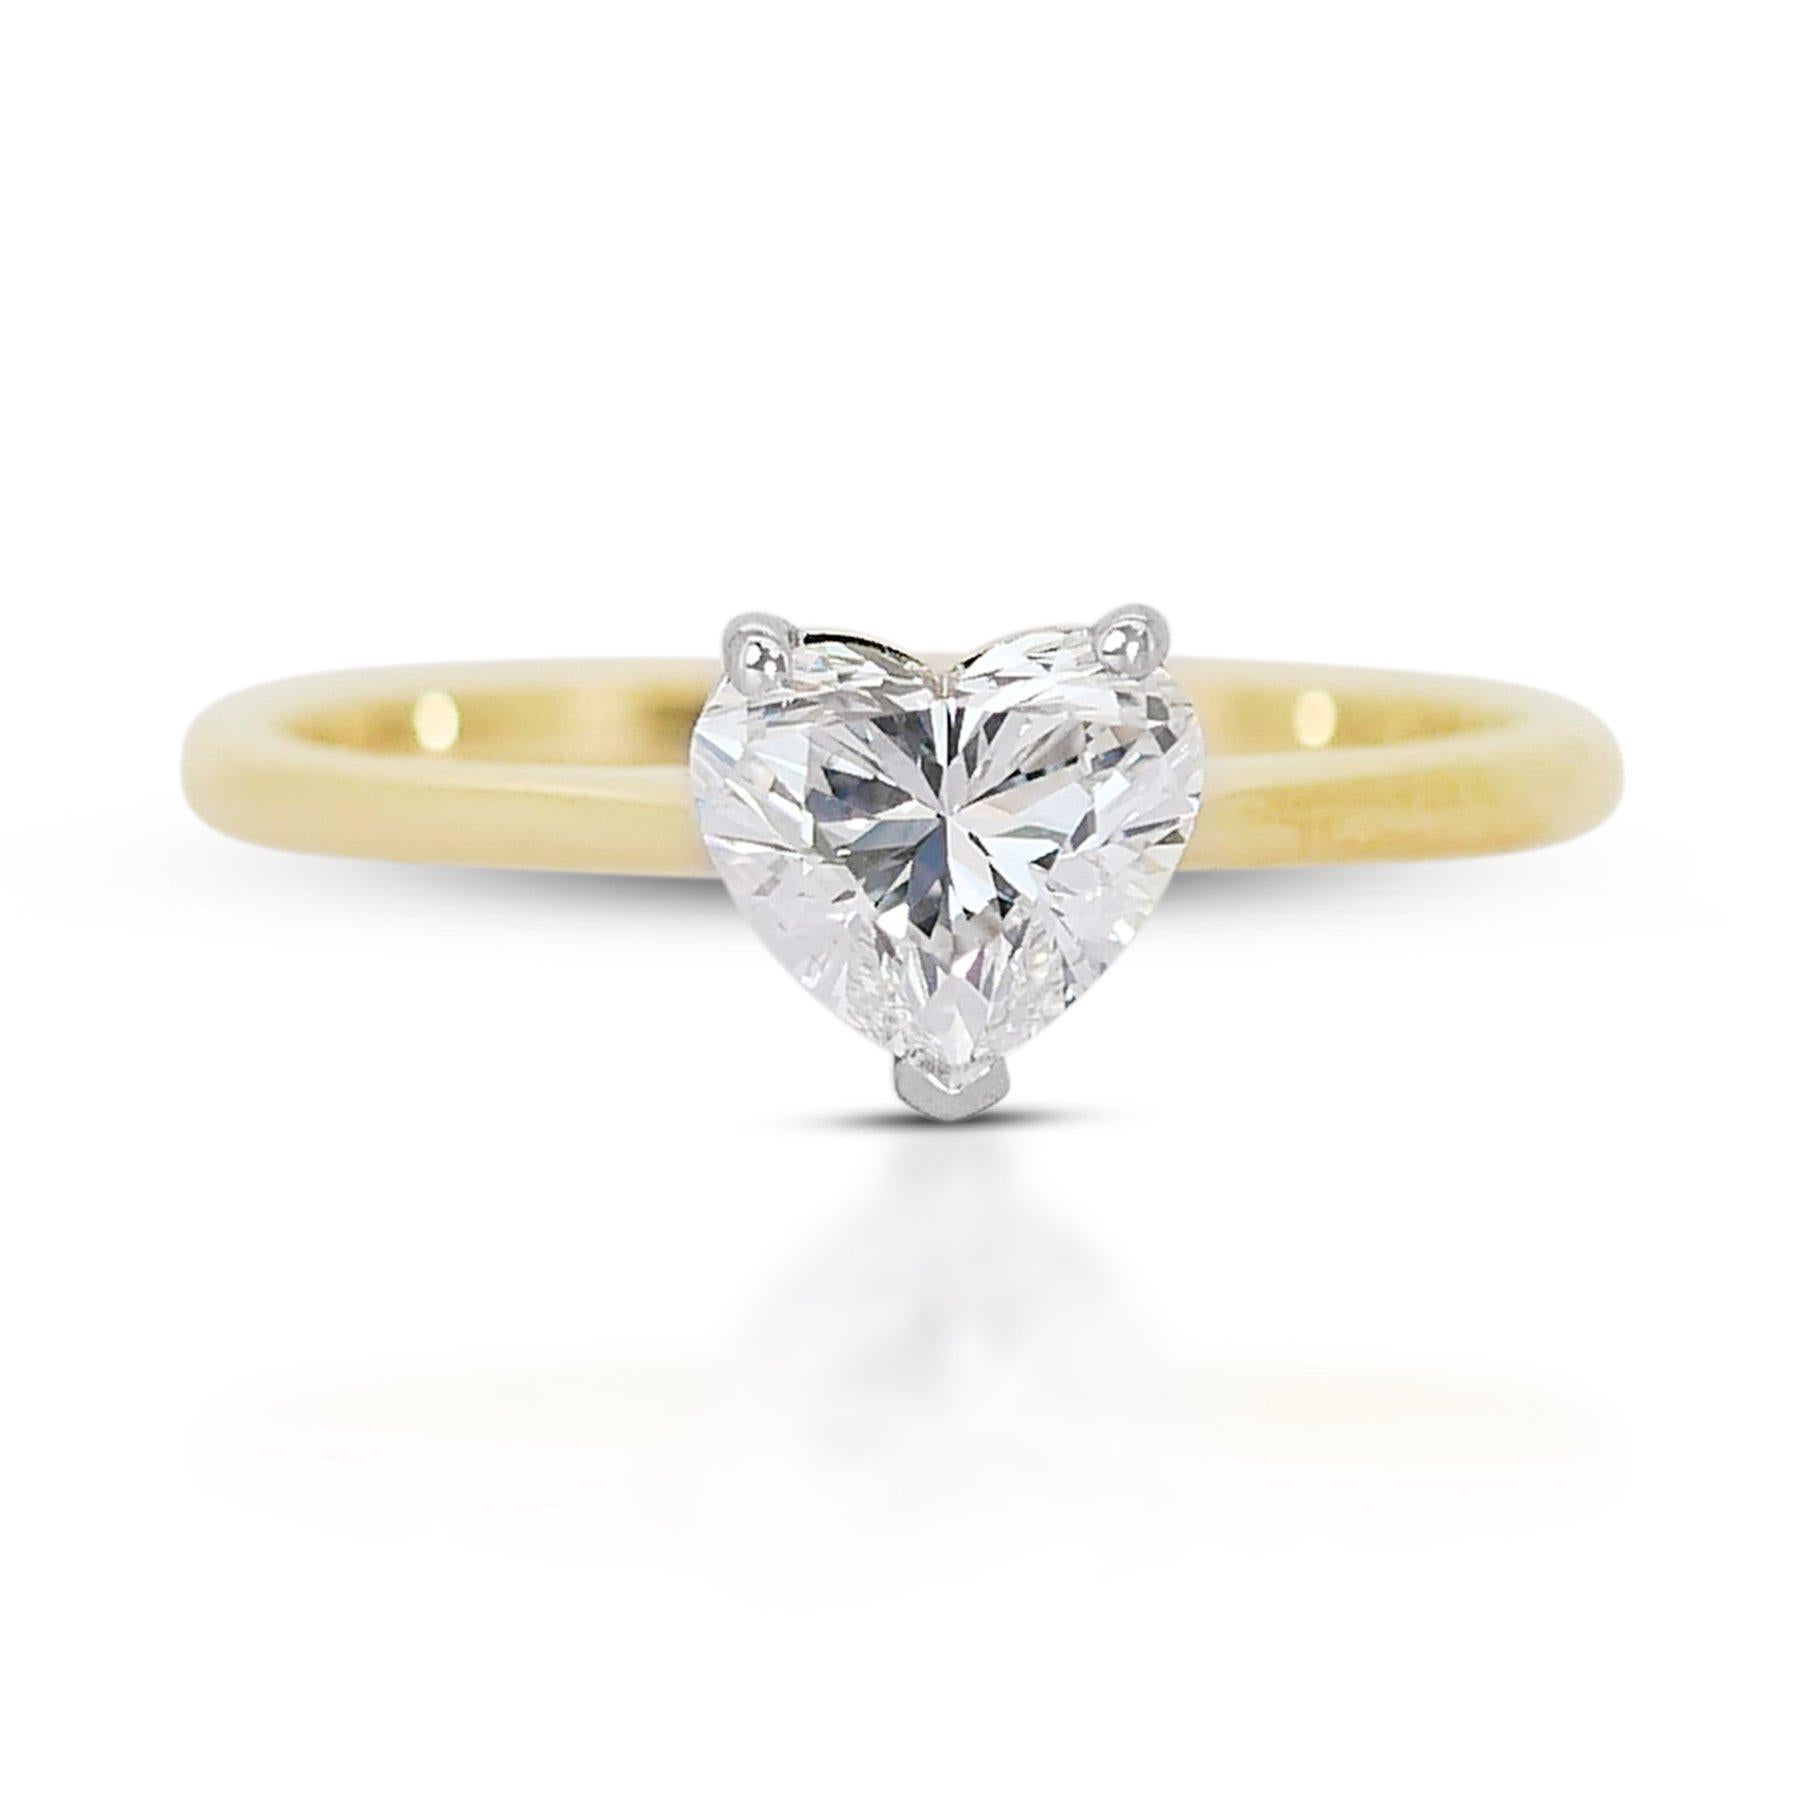 Charming 0.75 ct Heart-Shaped Diamond Solitaire Ring in 18k Yellow Gold – GIA  3